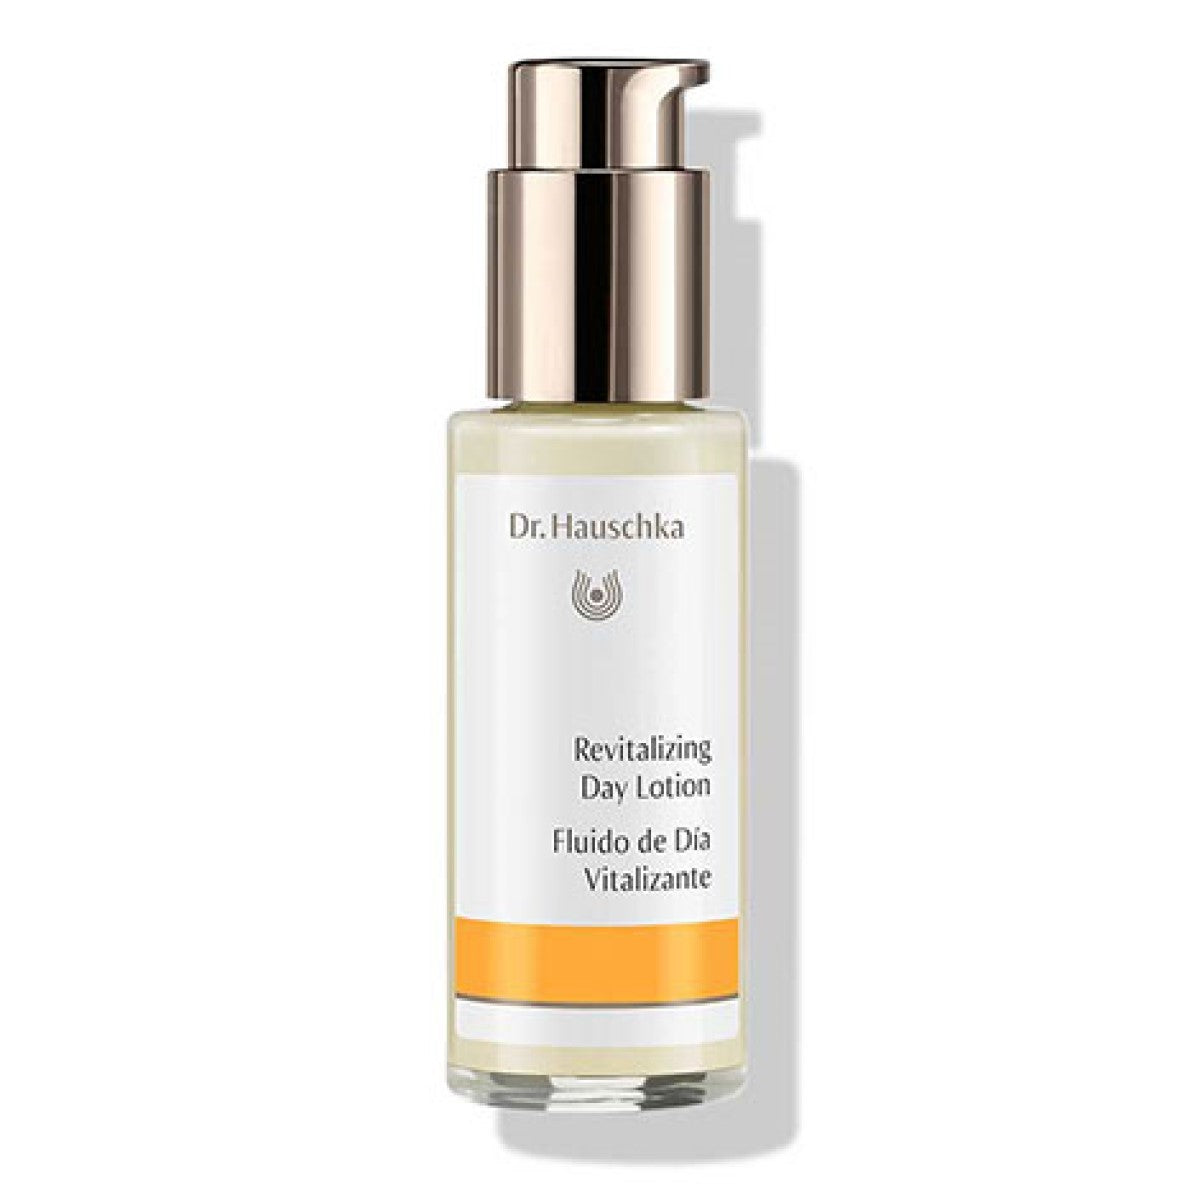 Primary Image of Skin Care Revitalizing Day Lotion